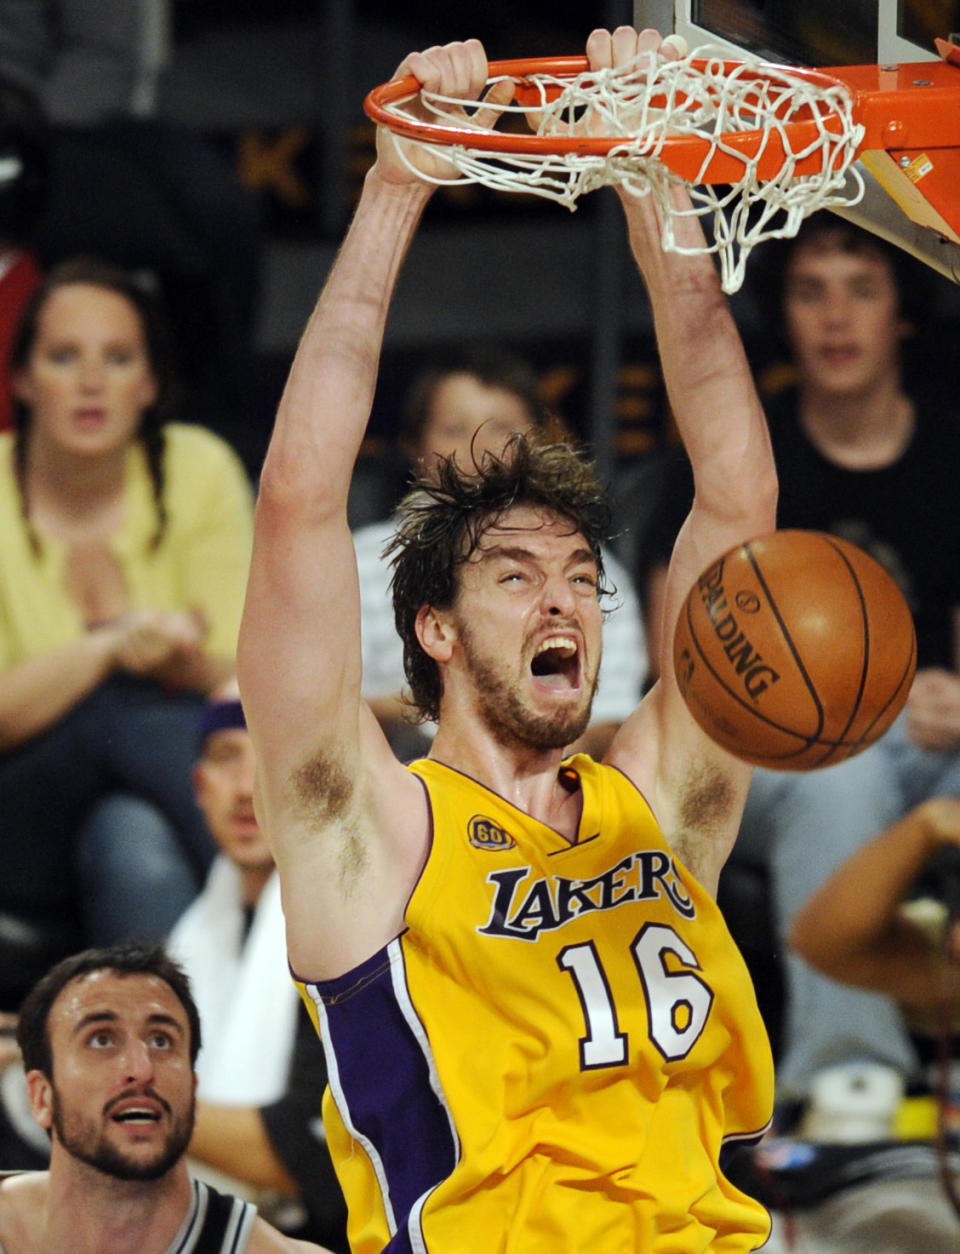 FILE - Los Angeles Lakers' Pau Gasol (16), of Spain, dunks as San Antonio Spurs' Manu Ginobili, left, of Argentina, looks on during the second half of Game 5 of the NBA Western Conference basketball finals in Los Angeles, May 29, 2008. Gasol was announced Friday, Feb. 17, 2023, as being among the finalists for enshrinement later this year by the Basketball Hall of Fame. The class will be revealed on April 1. (AP Photo/Chris Pizzello, File)